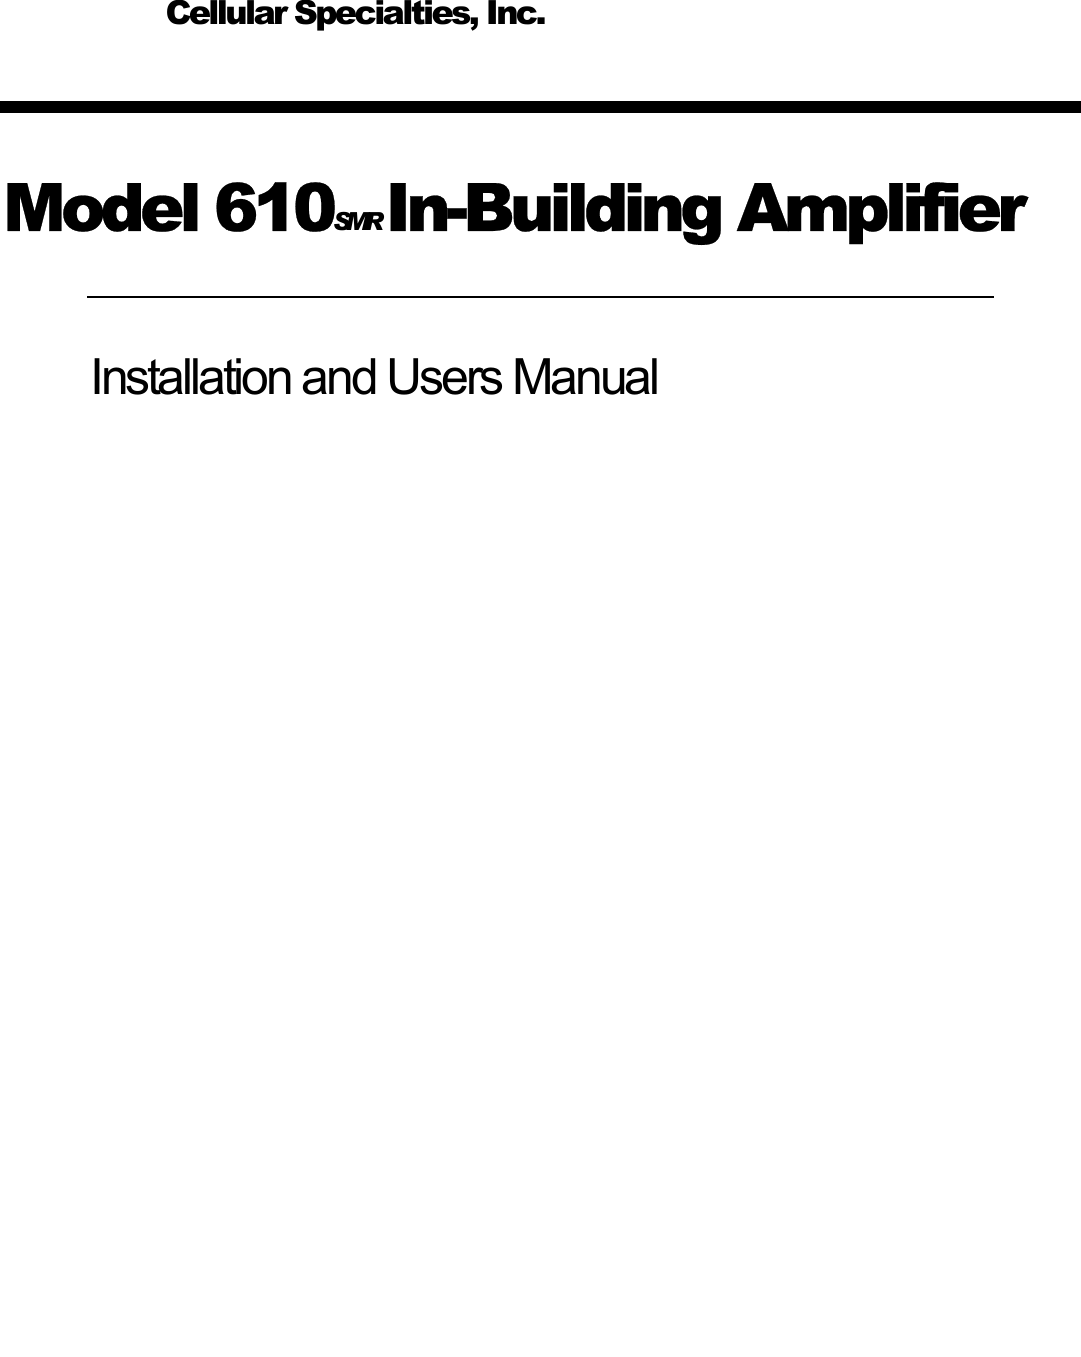     Model 610SMR  In-Building Amplifier Installation and Users Manual       Cellular Specialties, Inc. 